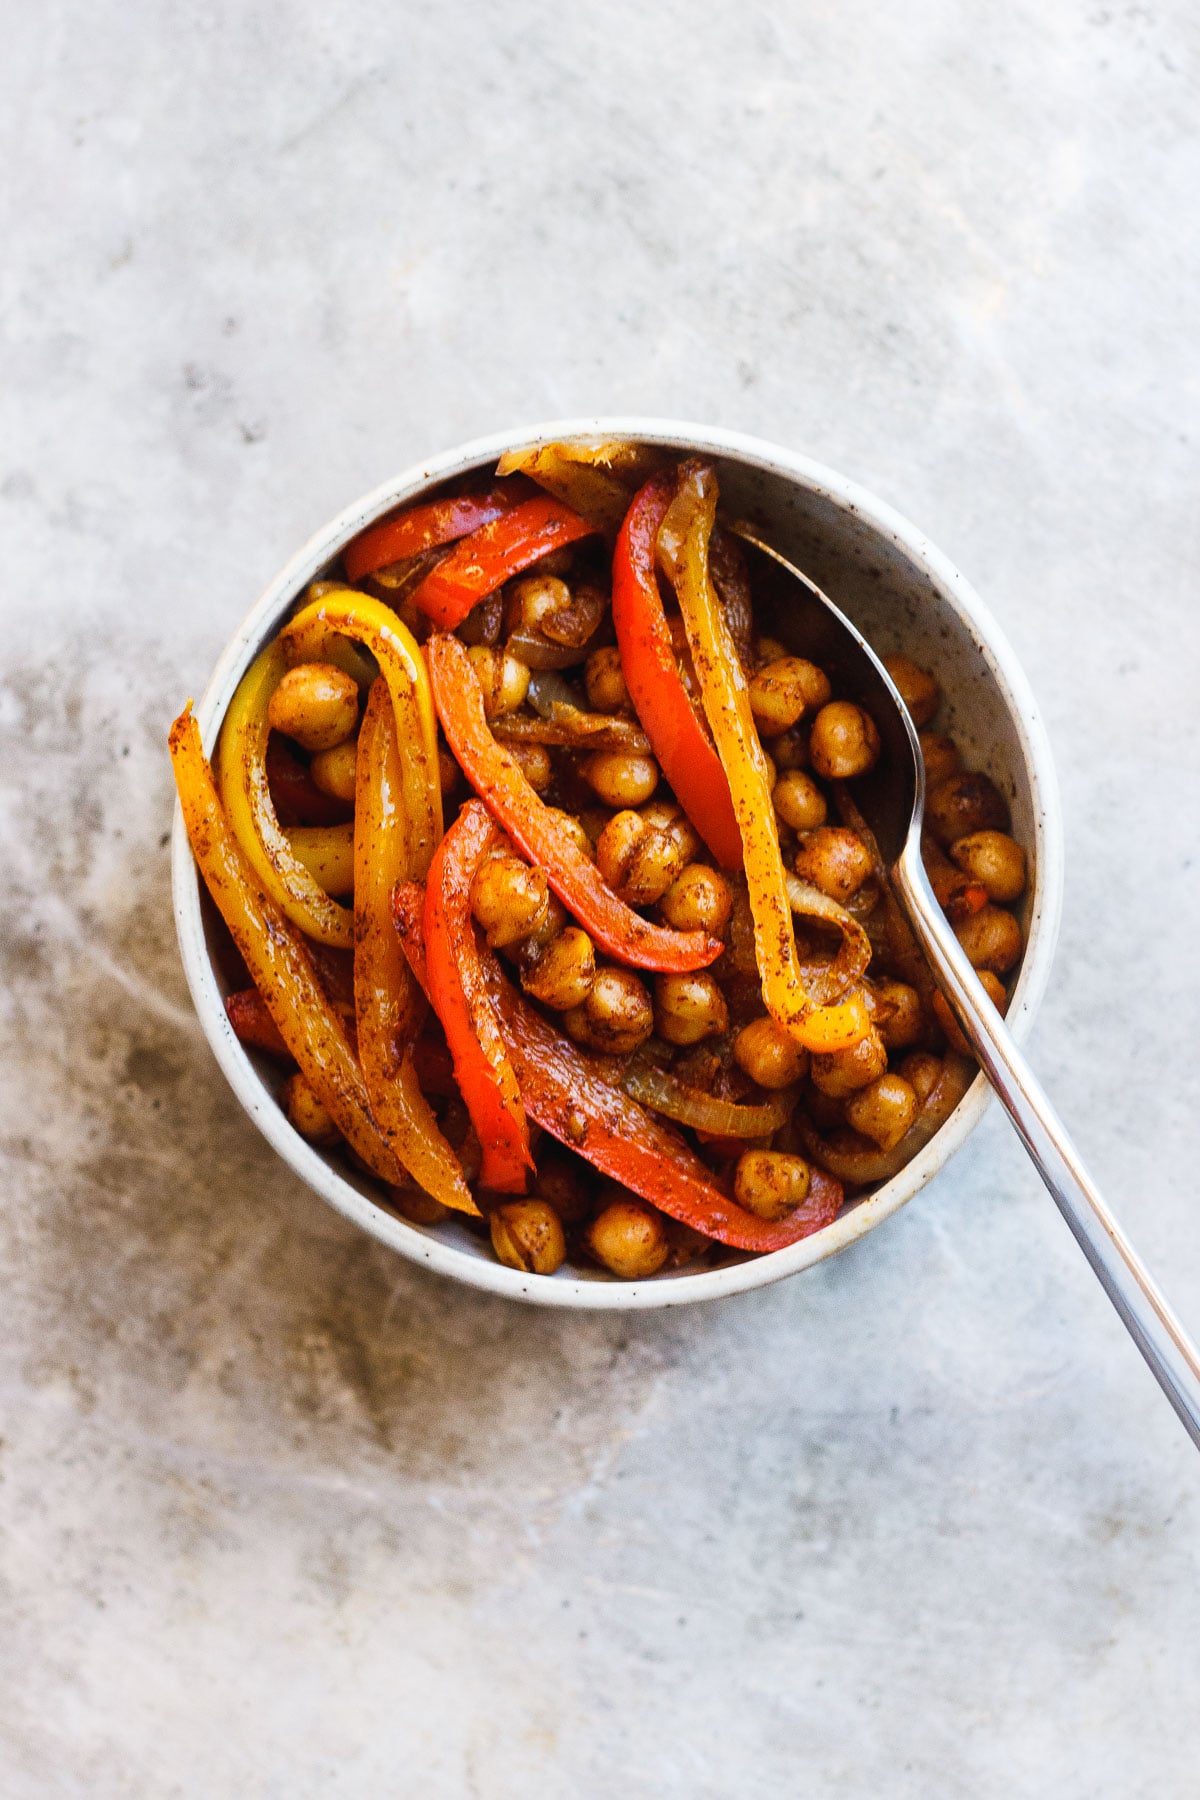 SHEET PAN FAJITAS WITH BELL PEPPERS AND CHICKPEAS